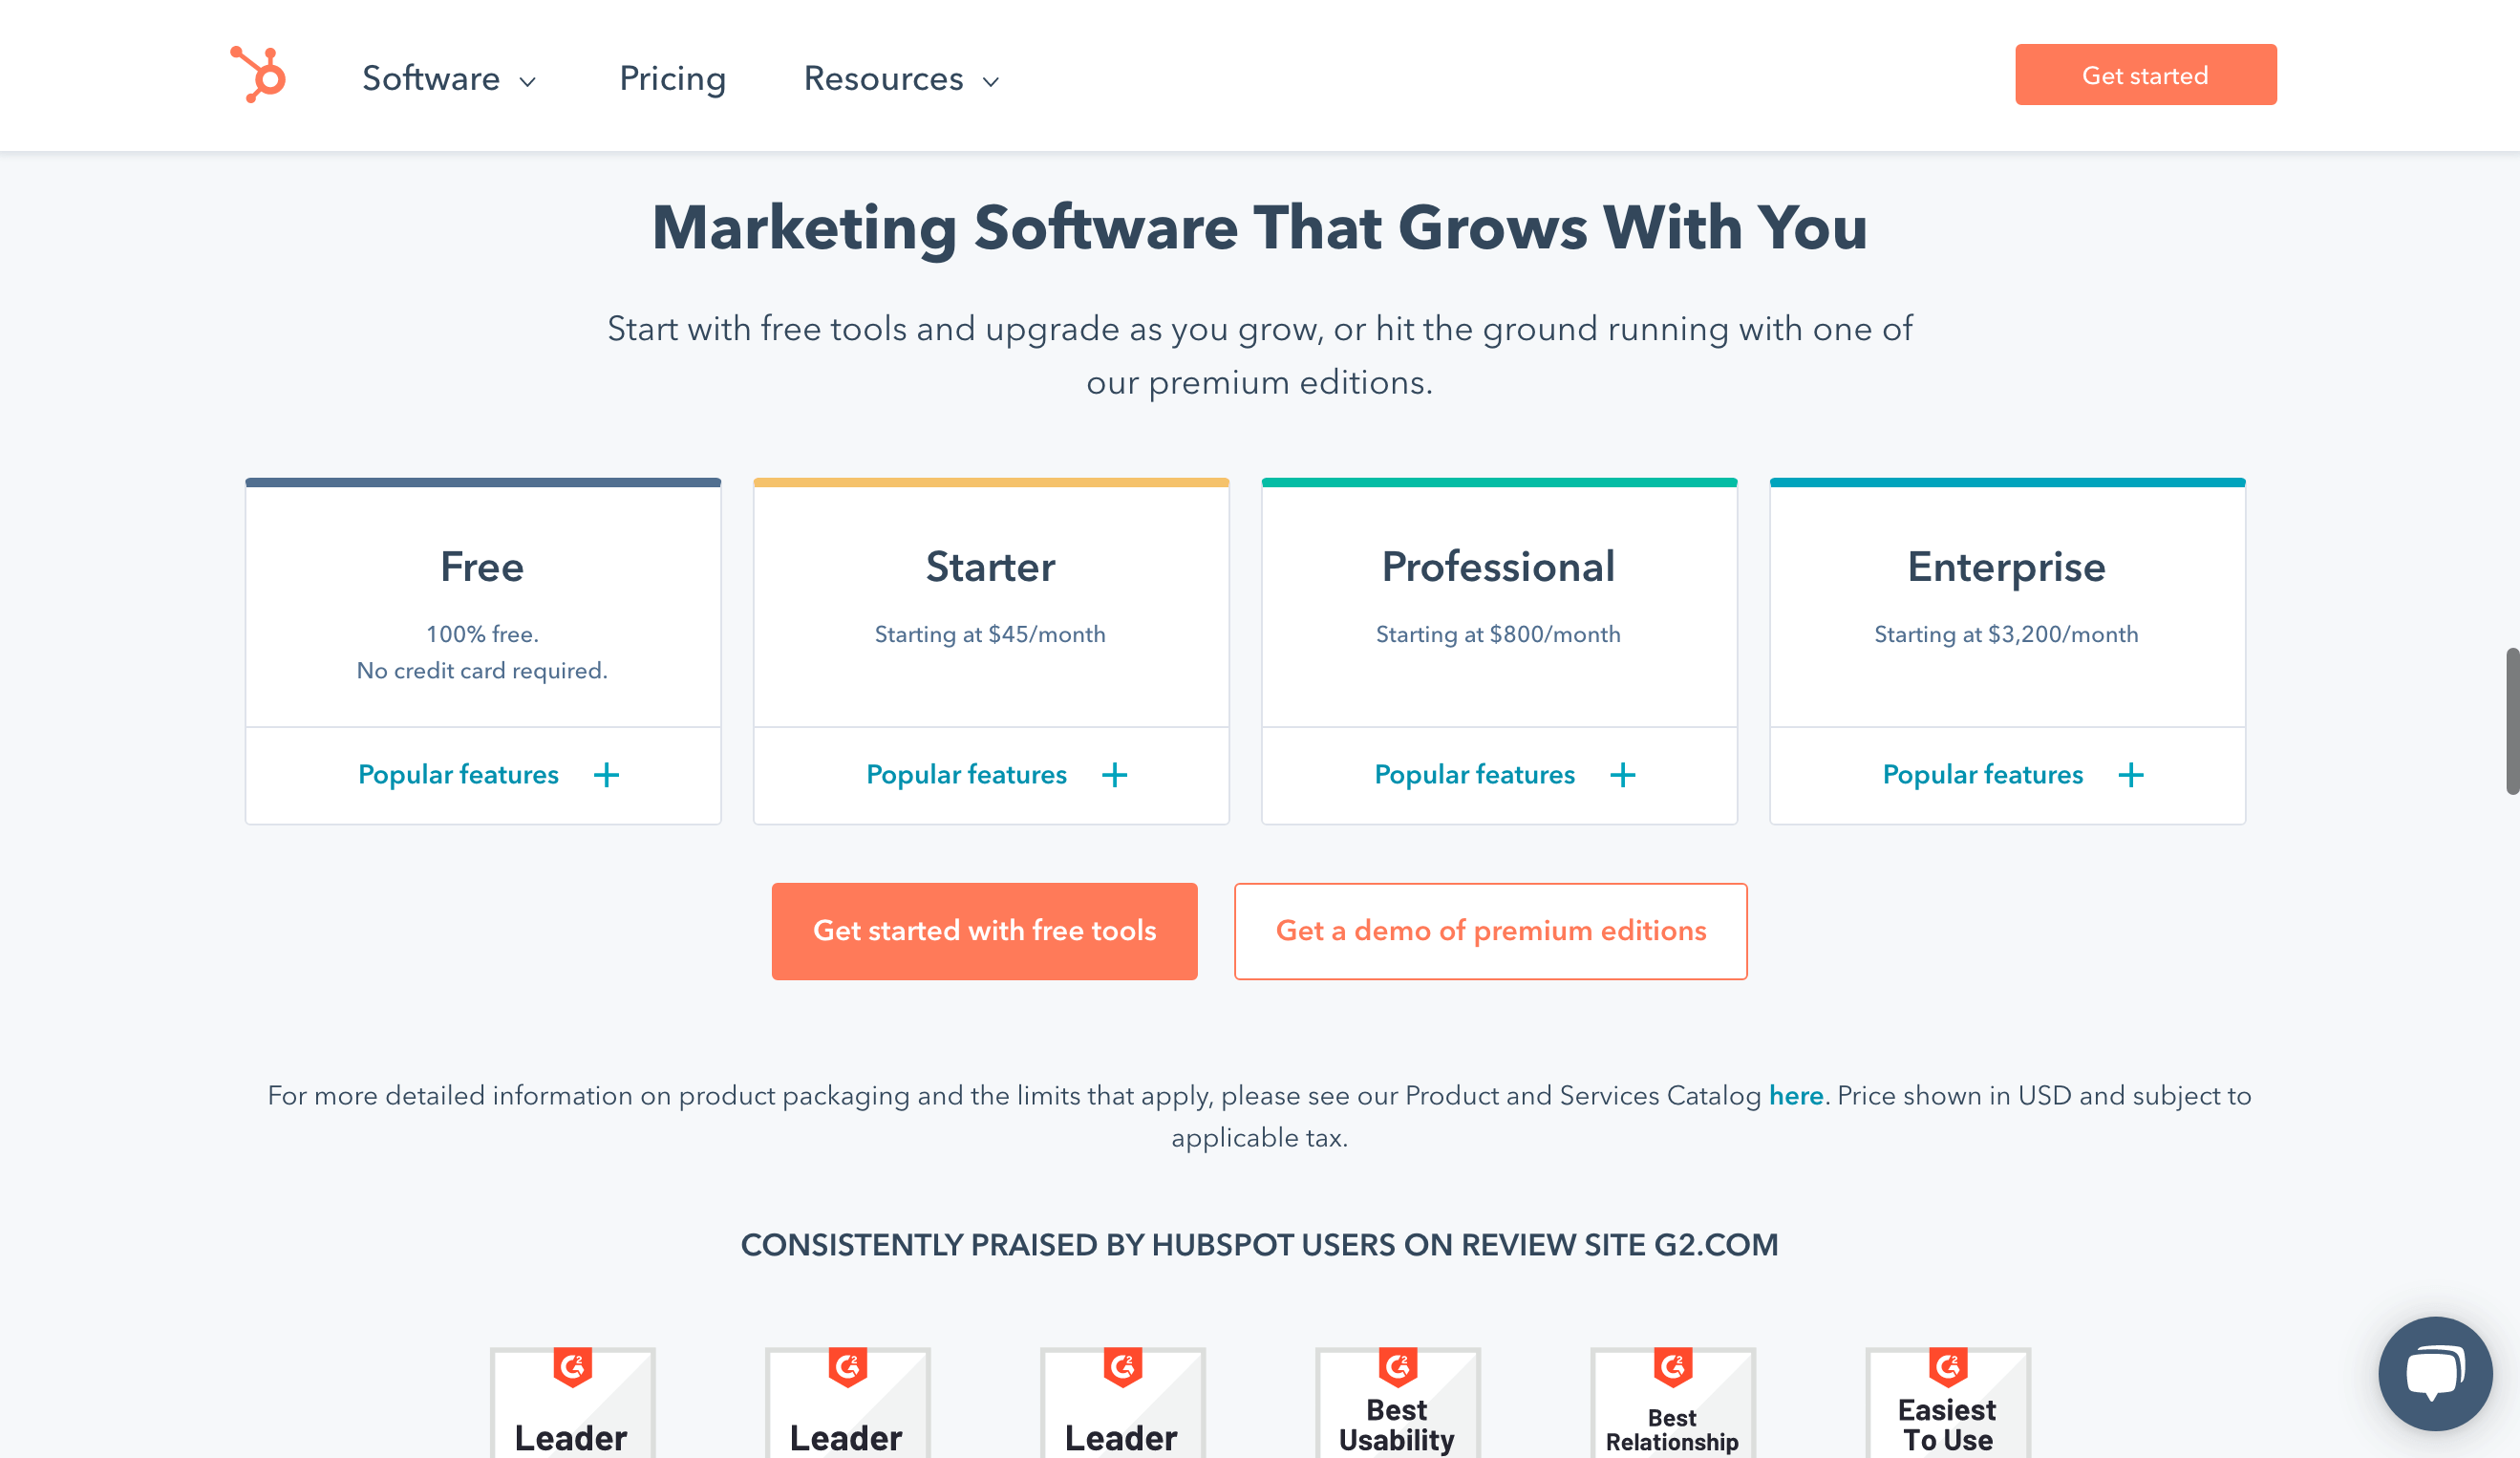 Hubspot's Marketing Software Products Page